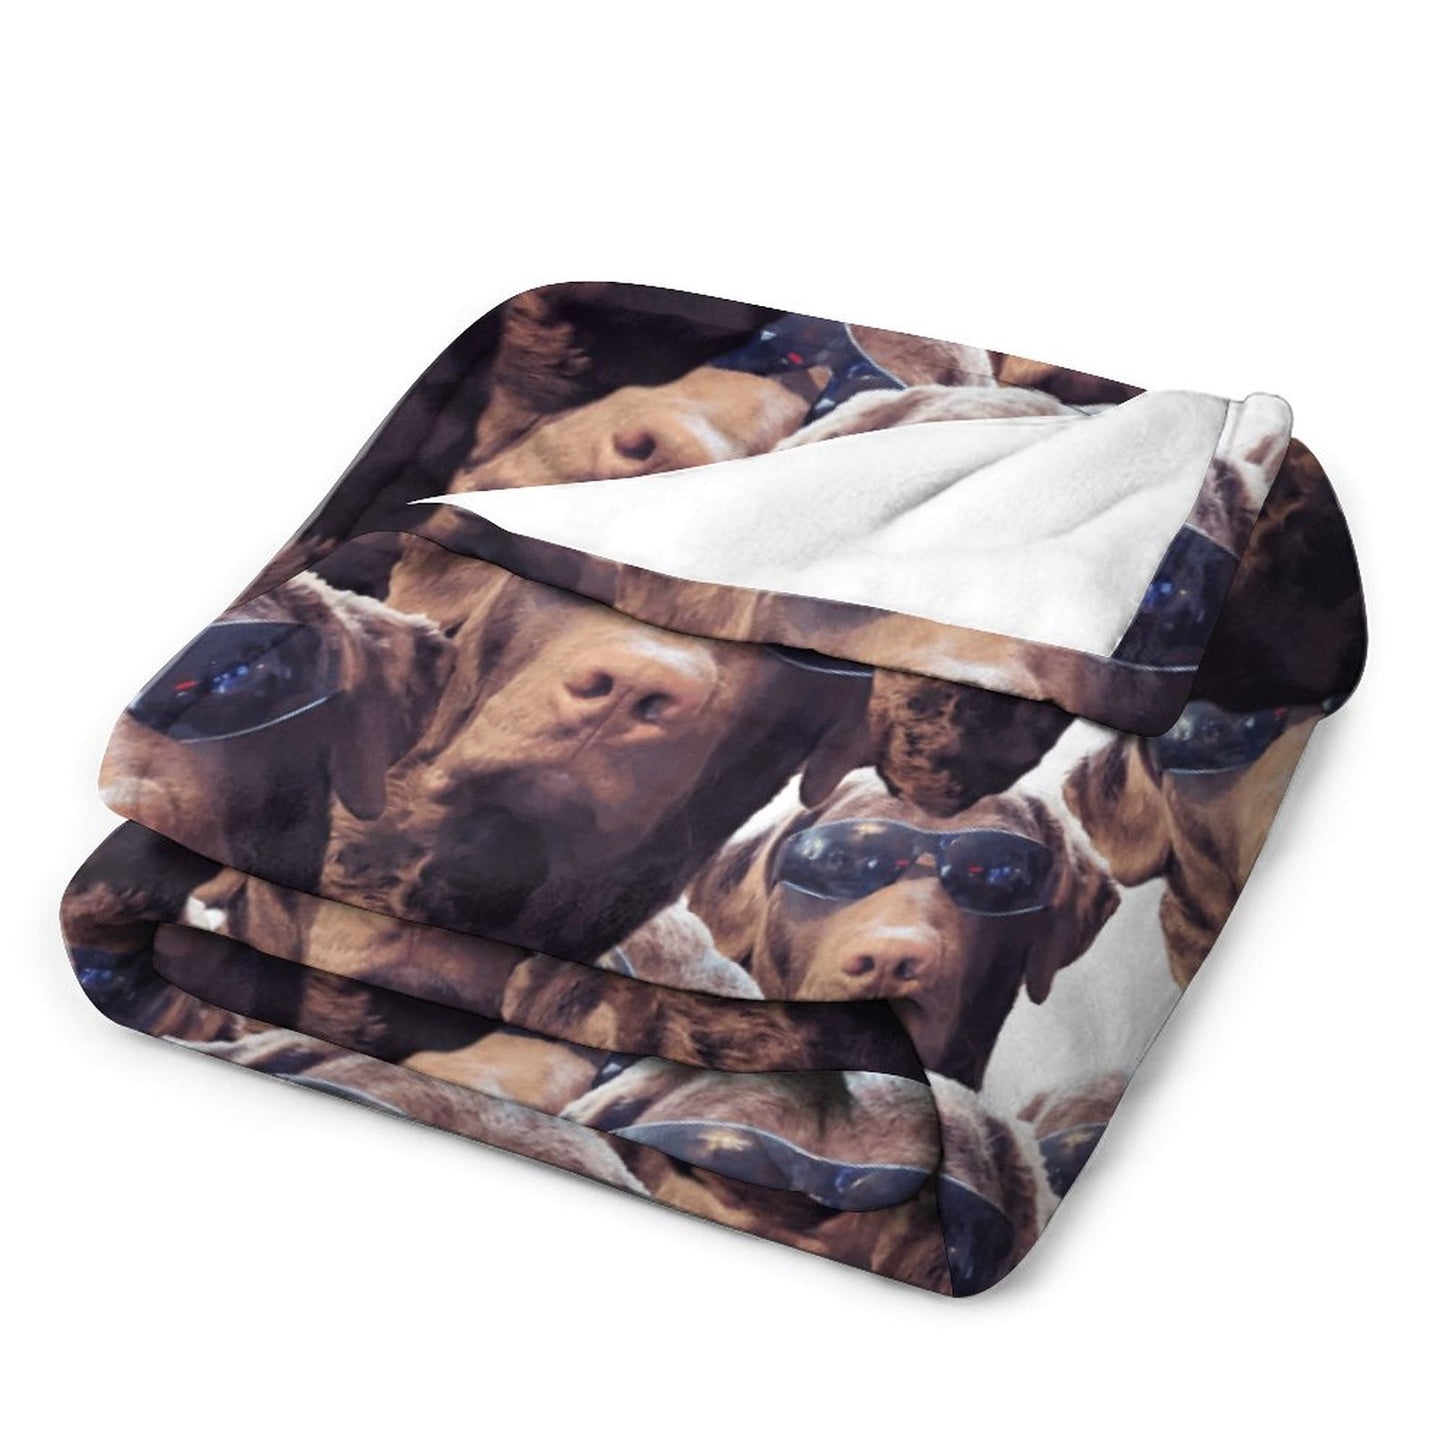 FOXY LADY _ LAB _ COLLAGE FACE DESIGN -Flannel Throw Blanket-60"x80"